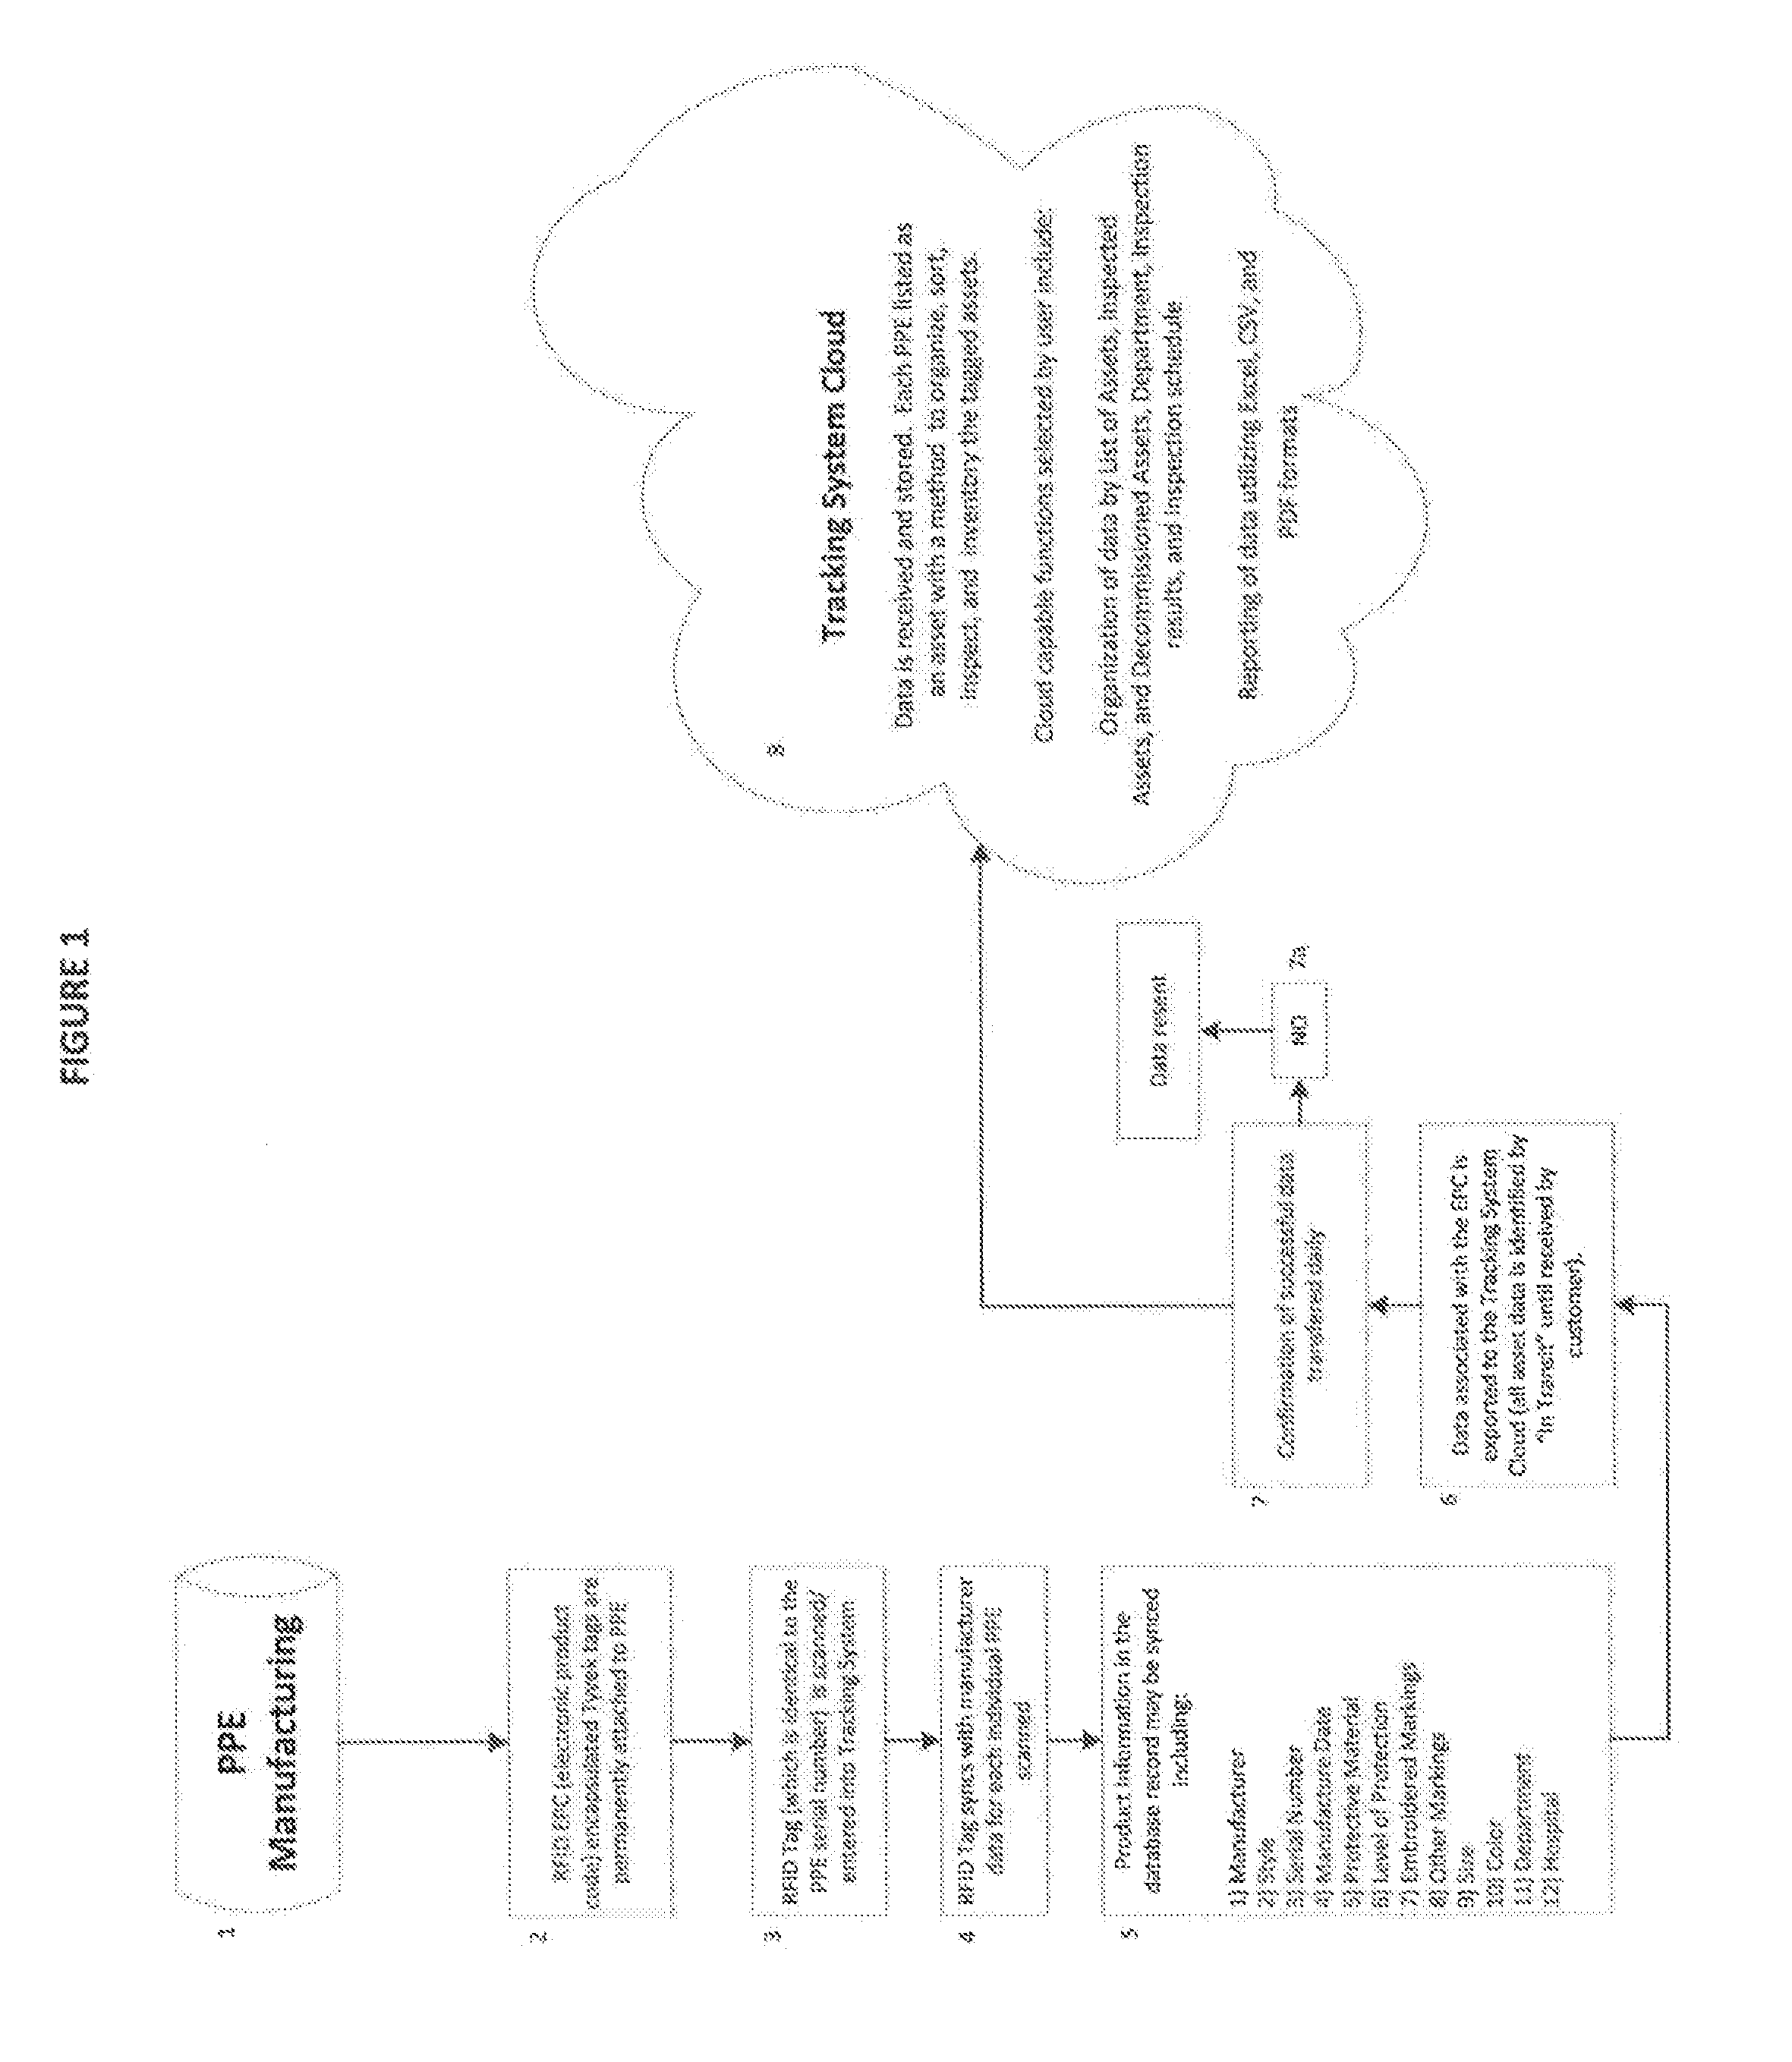 System and Method of Electronic Tracking and Information Retrieval for the Integrity and Testing of Radiopharmaceutical Personal Protective Equipment